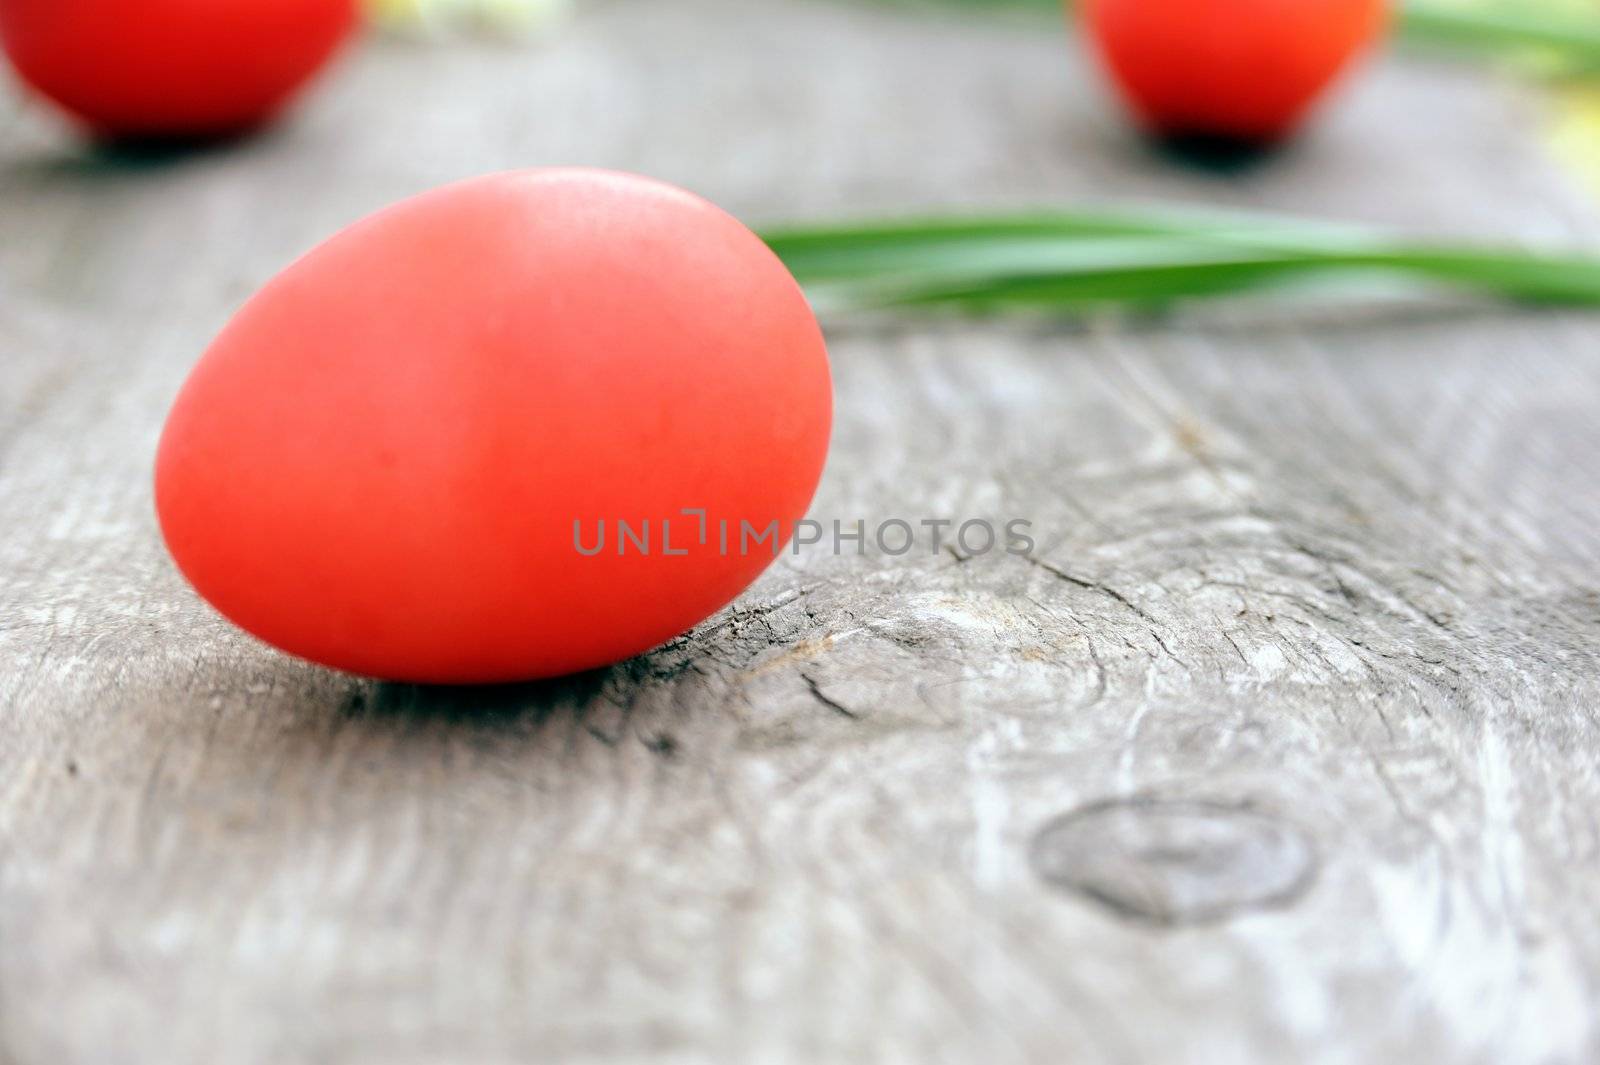 An image of three red eggs on the wood